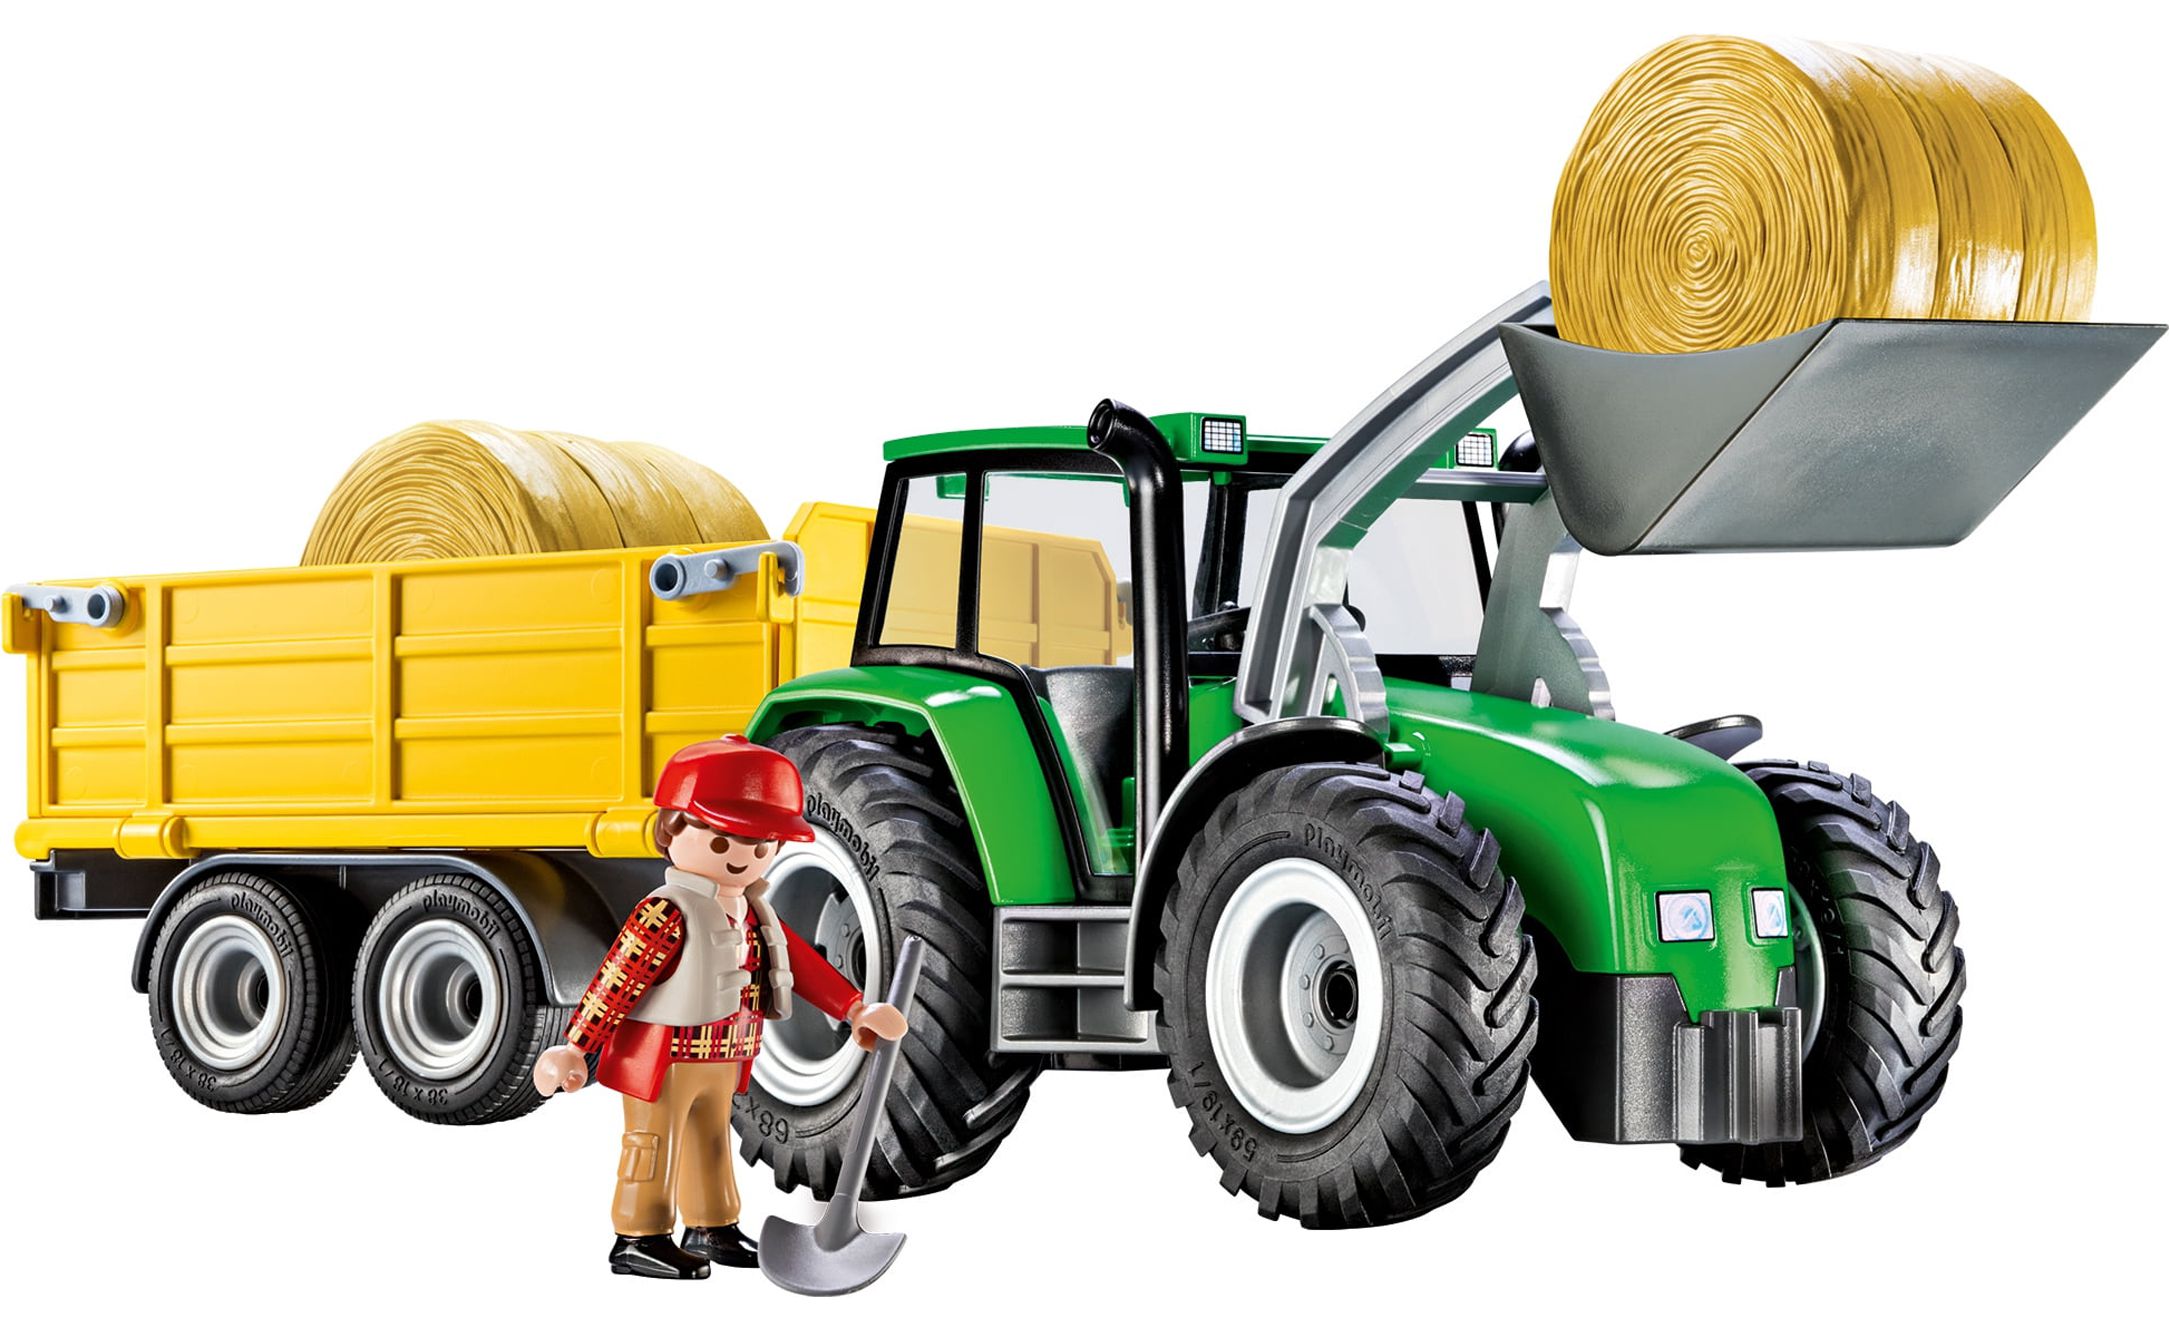 PLAYMOBIL Tractor with Trailer Play Vehicle - image 1 of 6